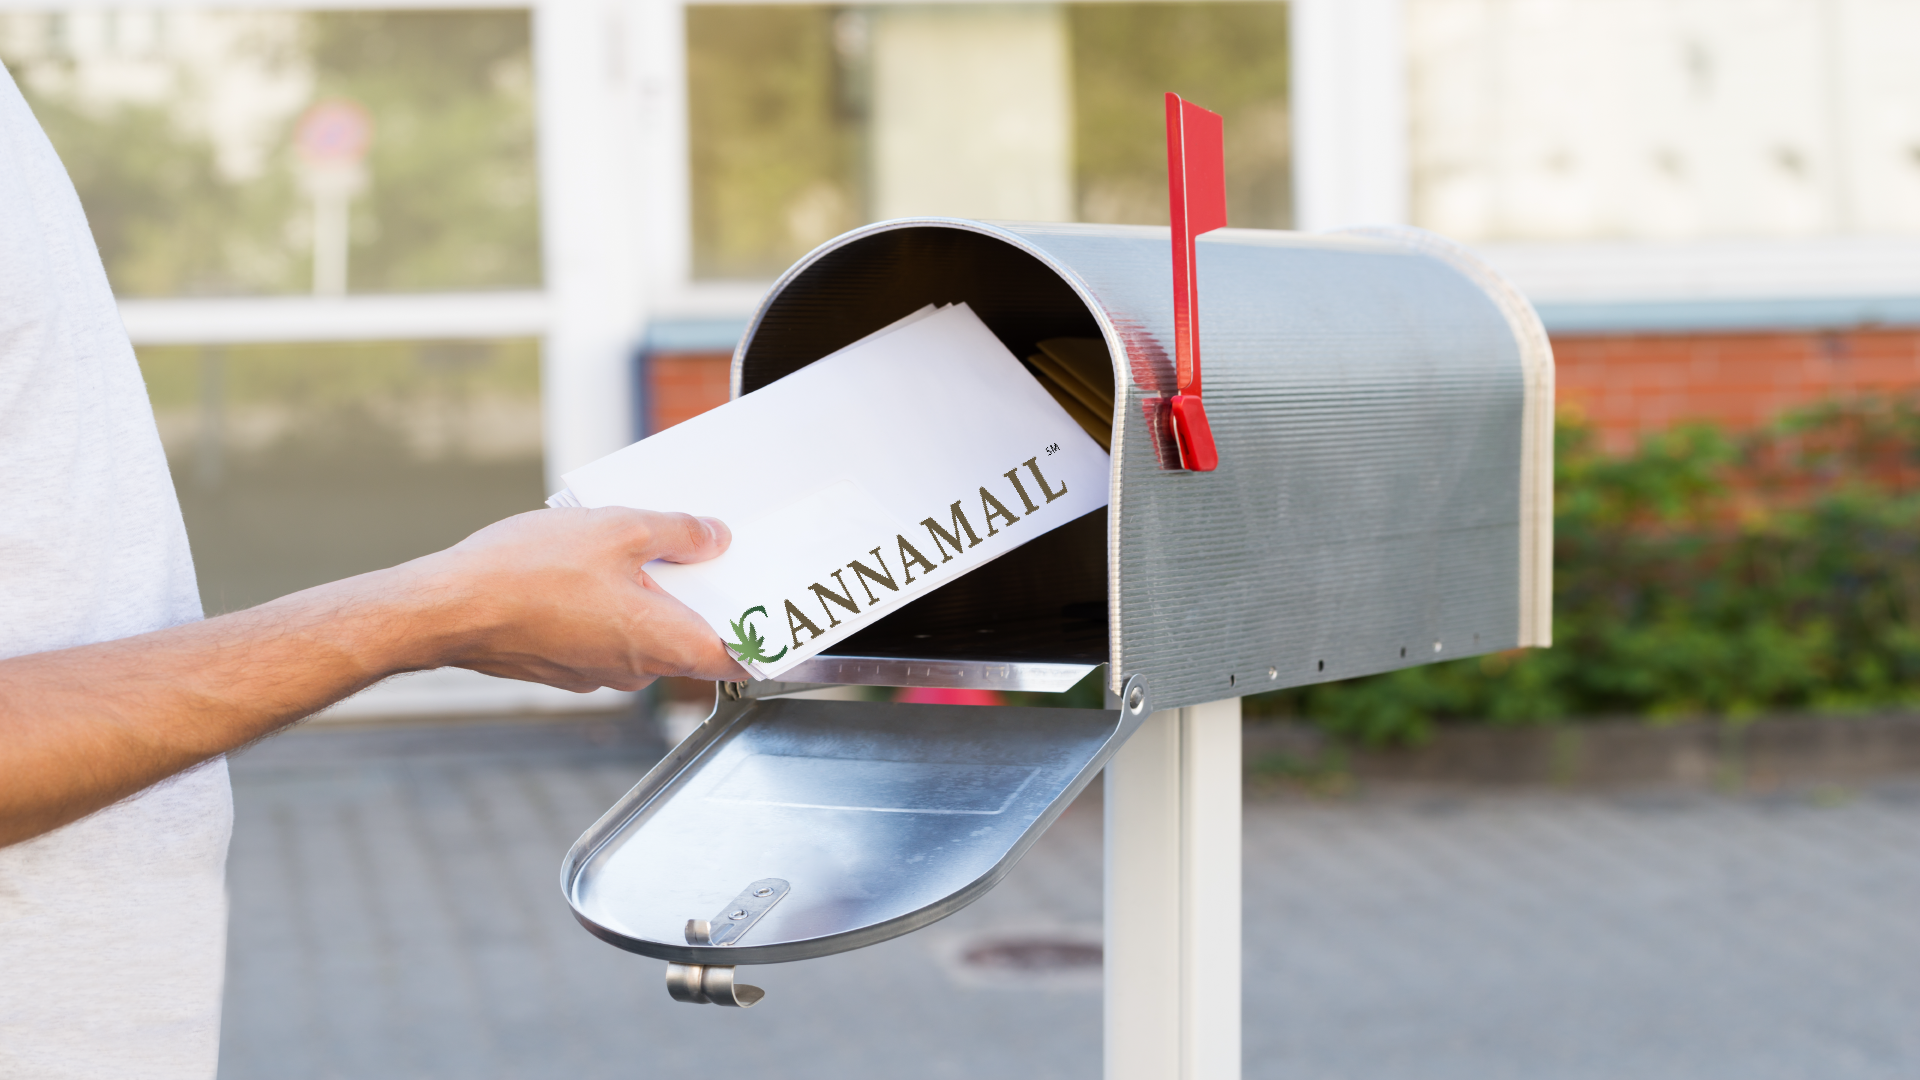 Learn the essentials on how to leverage Direct Mail